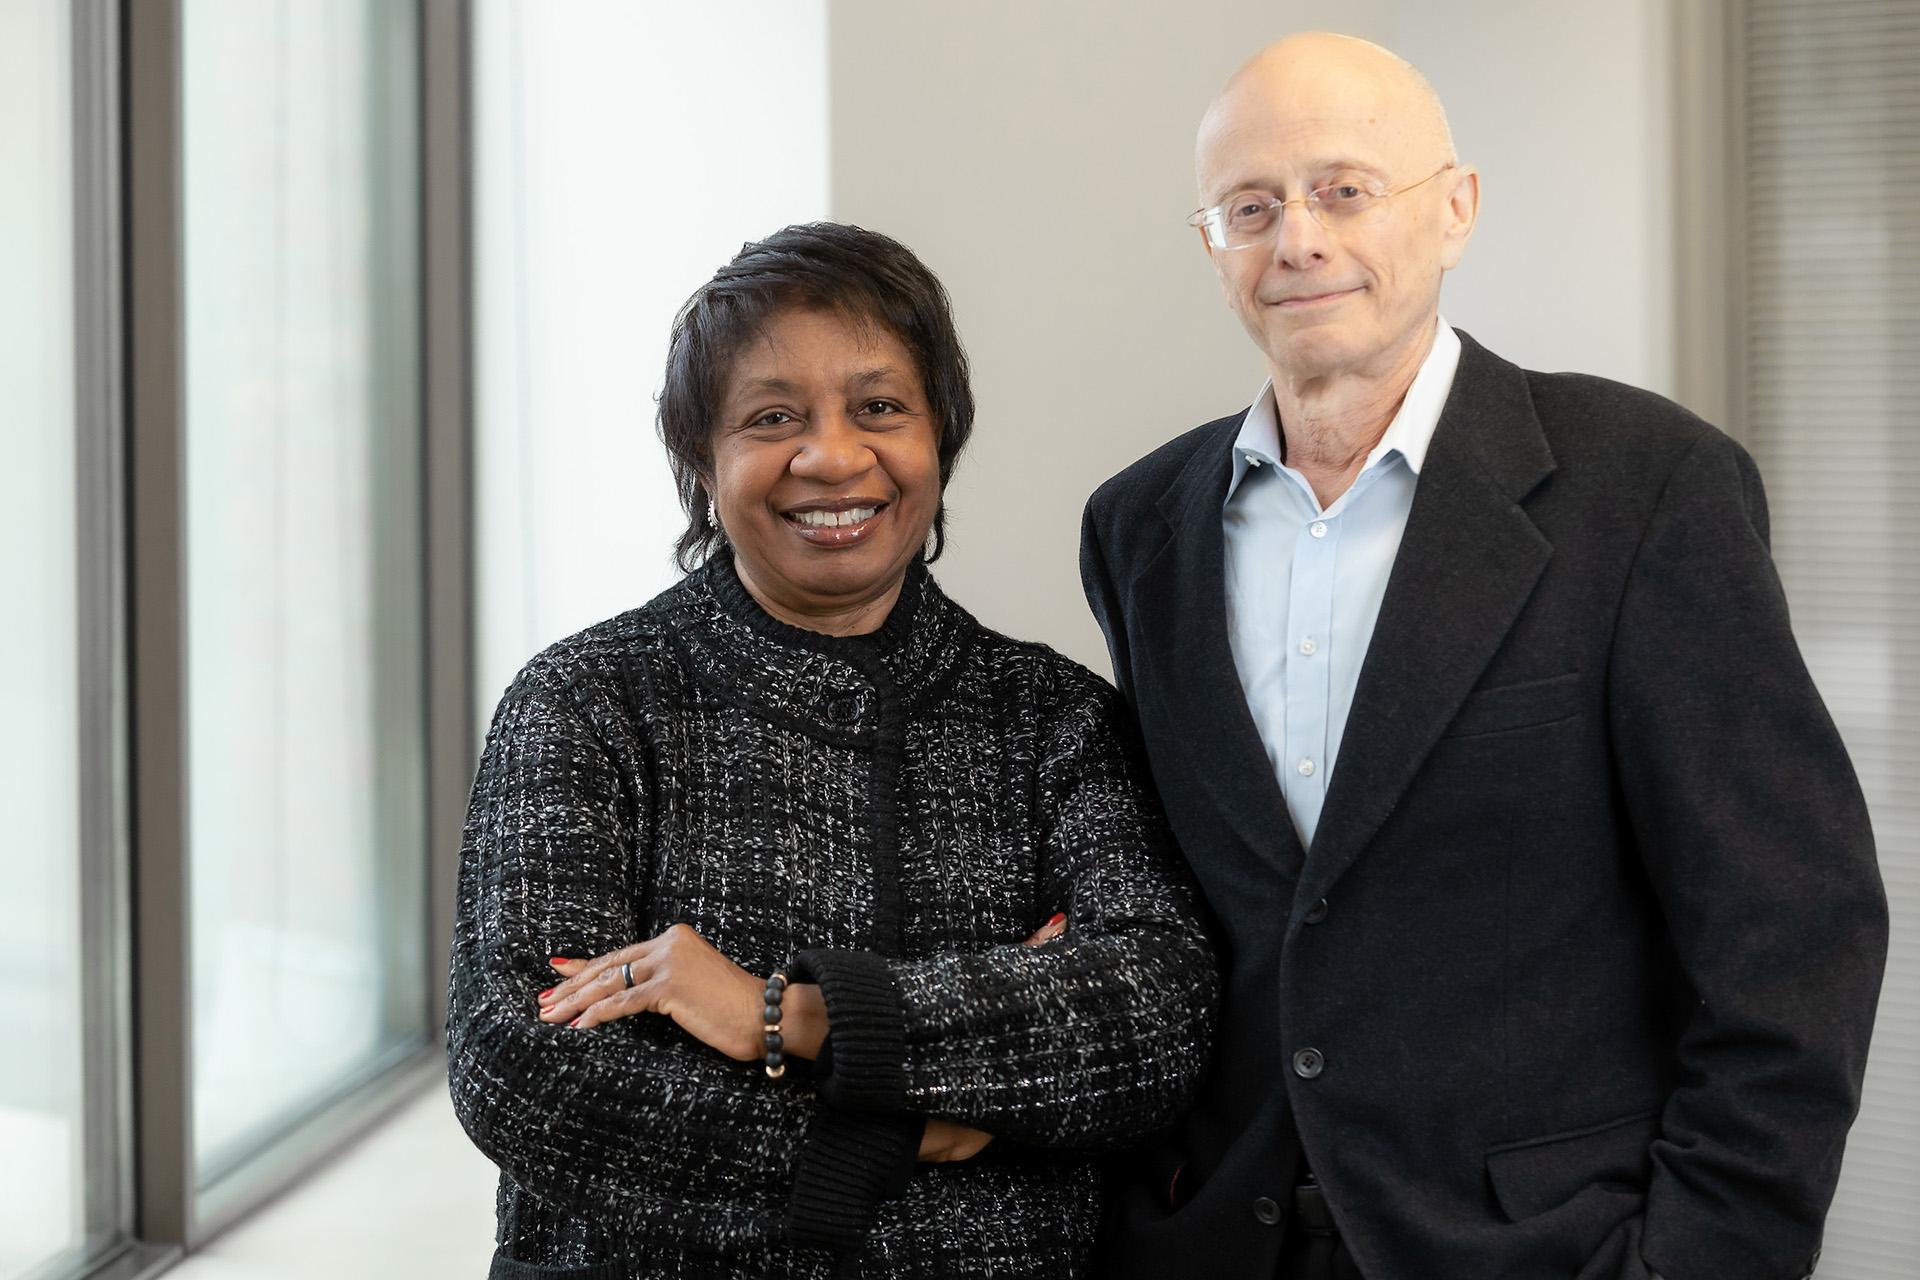 DePaul University psychology professors W. LaVome Robinson, left, and Leonard A. Jason have received a $6.6 million grant to fund research to reduce African American youth violence. (DePaul University / Jeff Carrion)